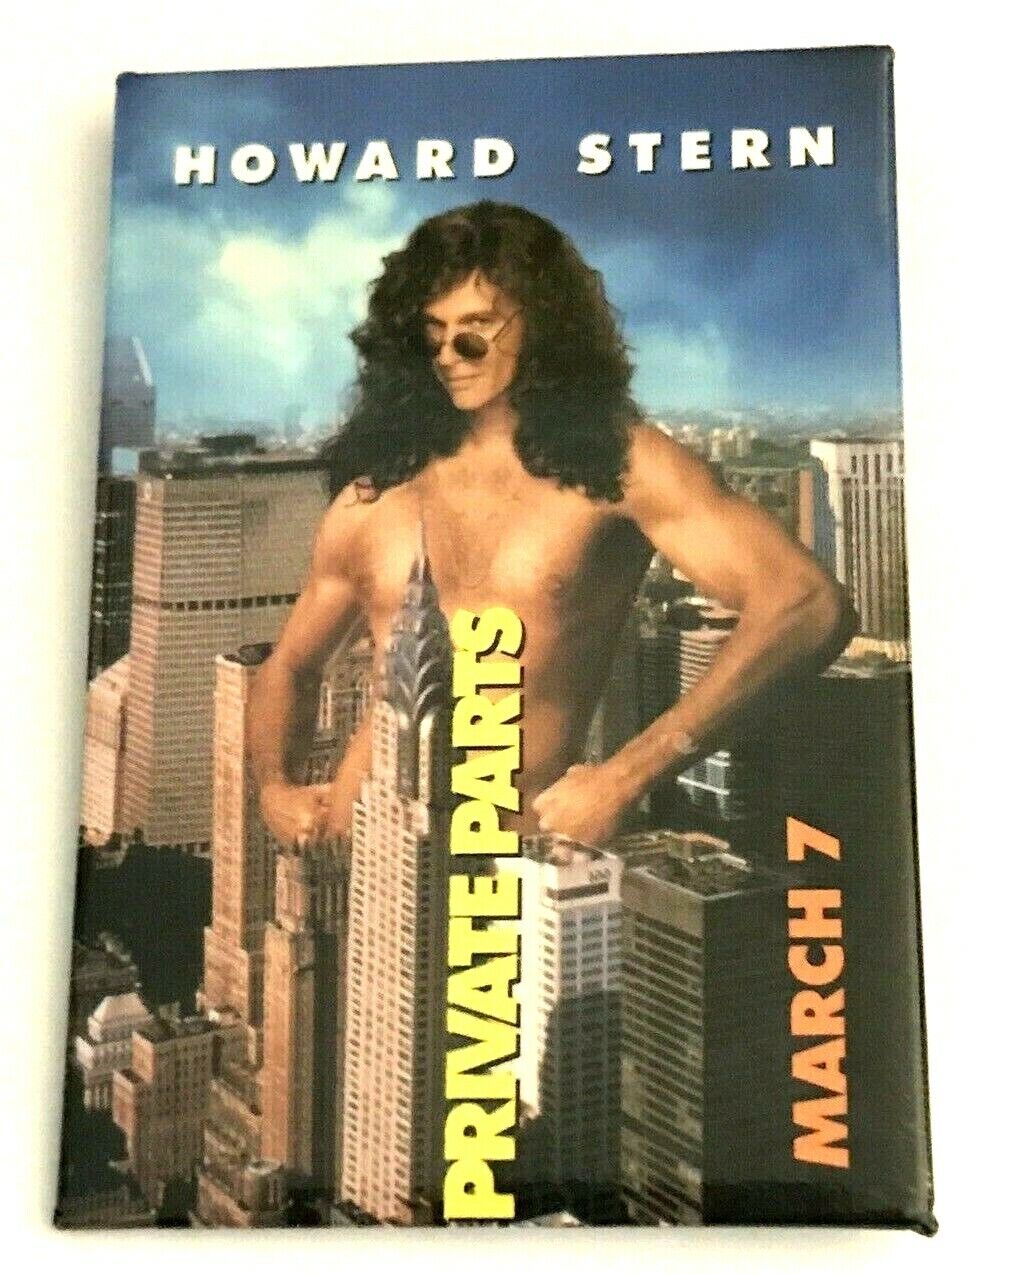 PRIVATE PARTS~Promo Movie Pinback Button Badge Vintage Pin HOWARD STERN Film